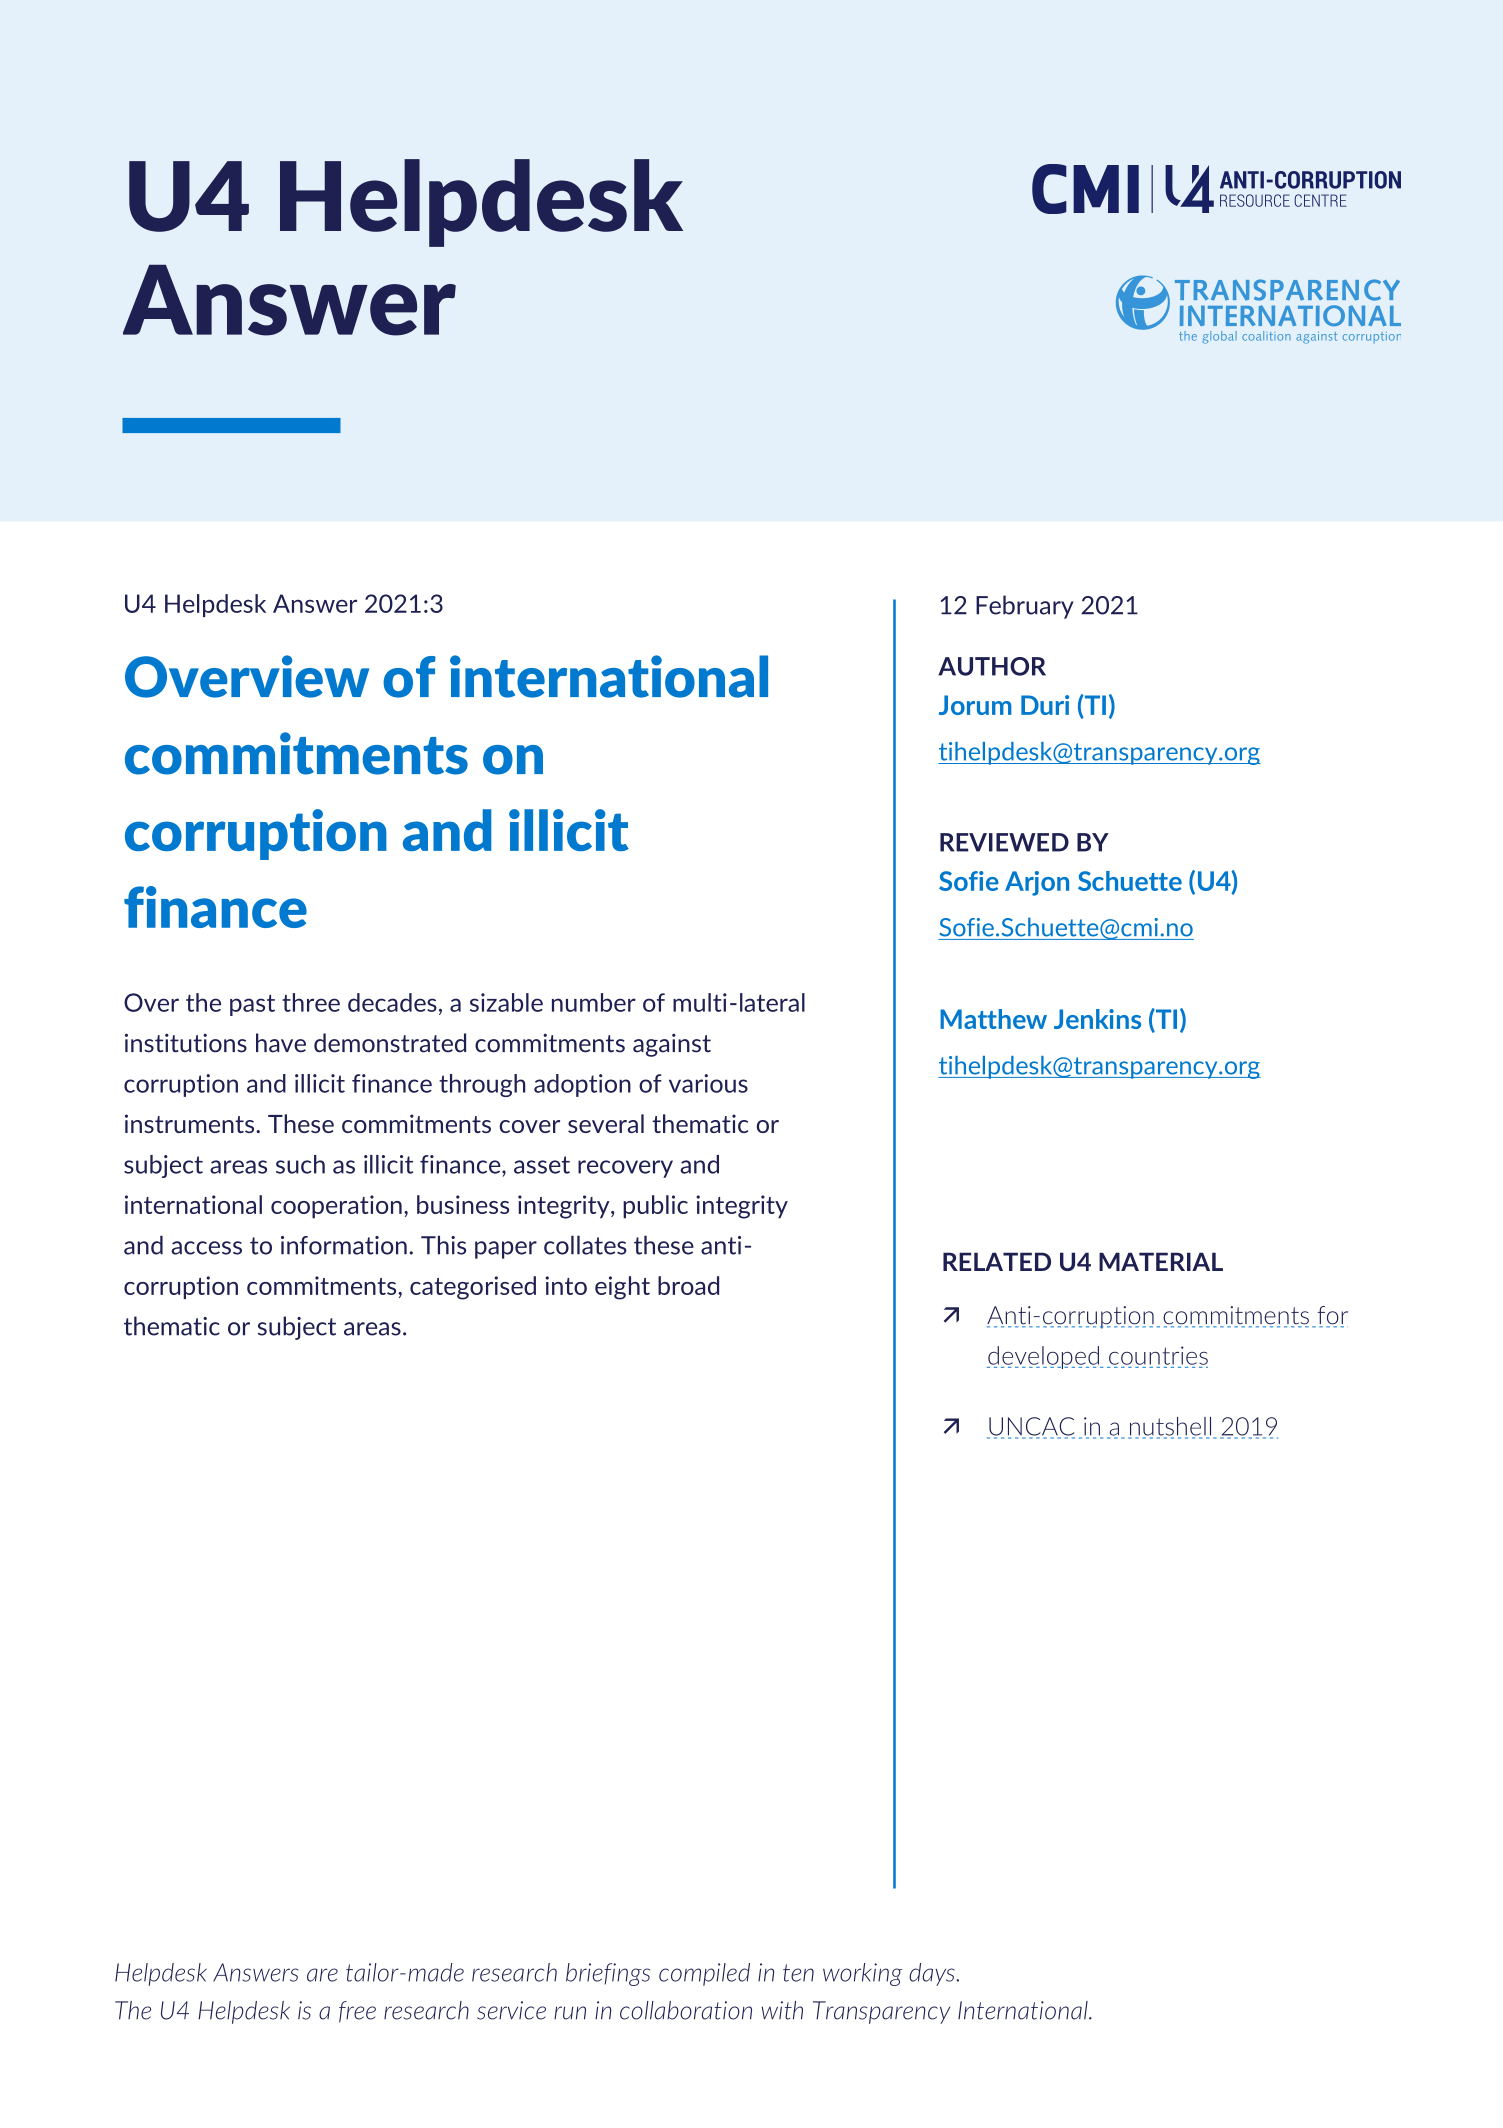 Overview of international commitments on corruption and illicit finance